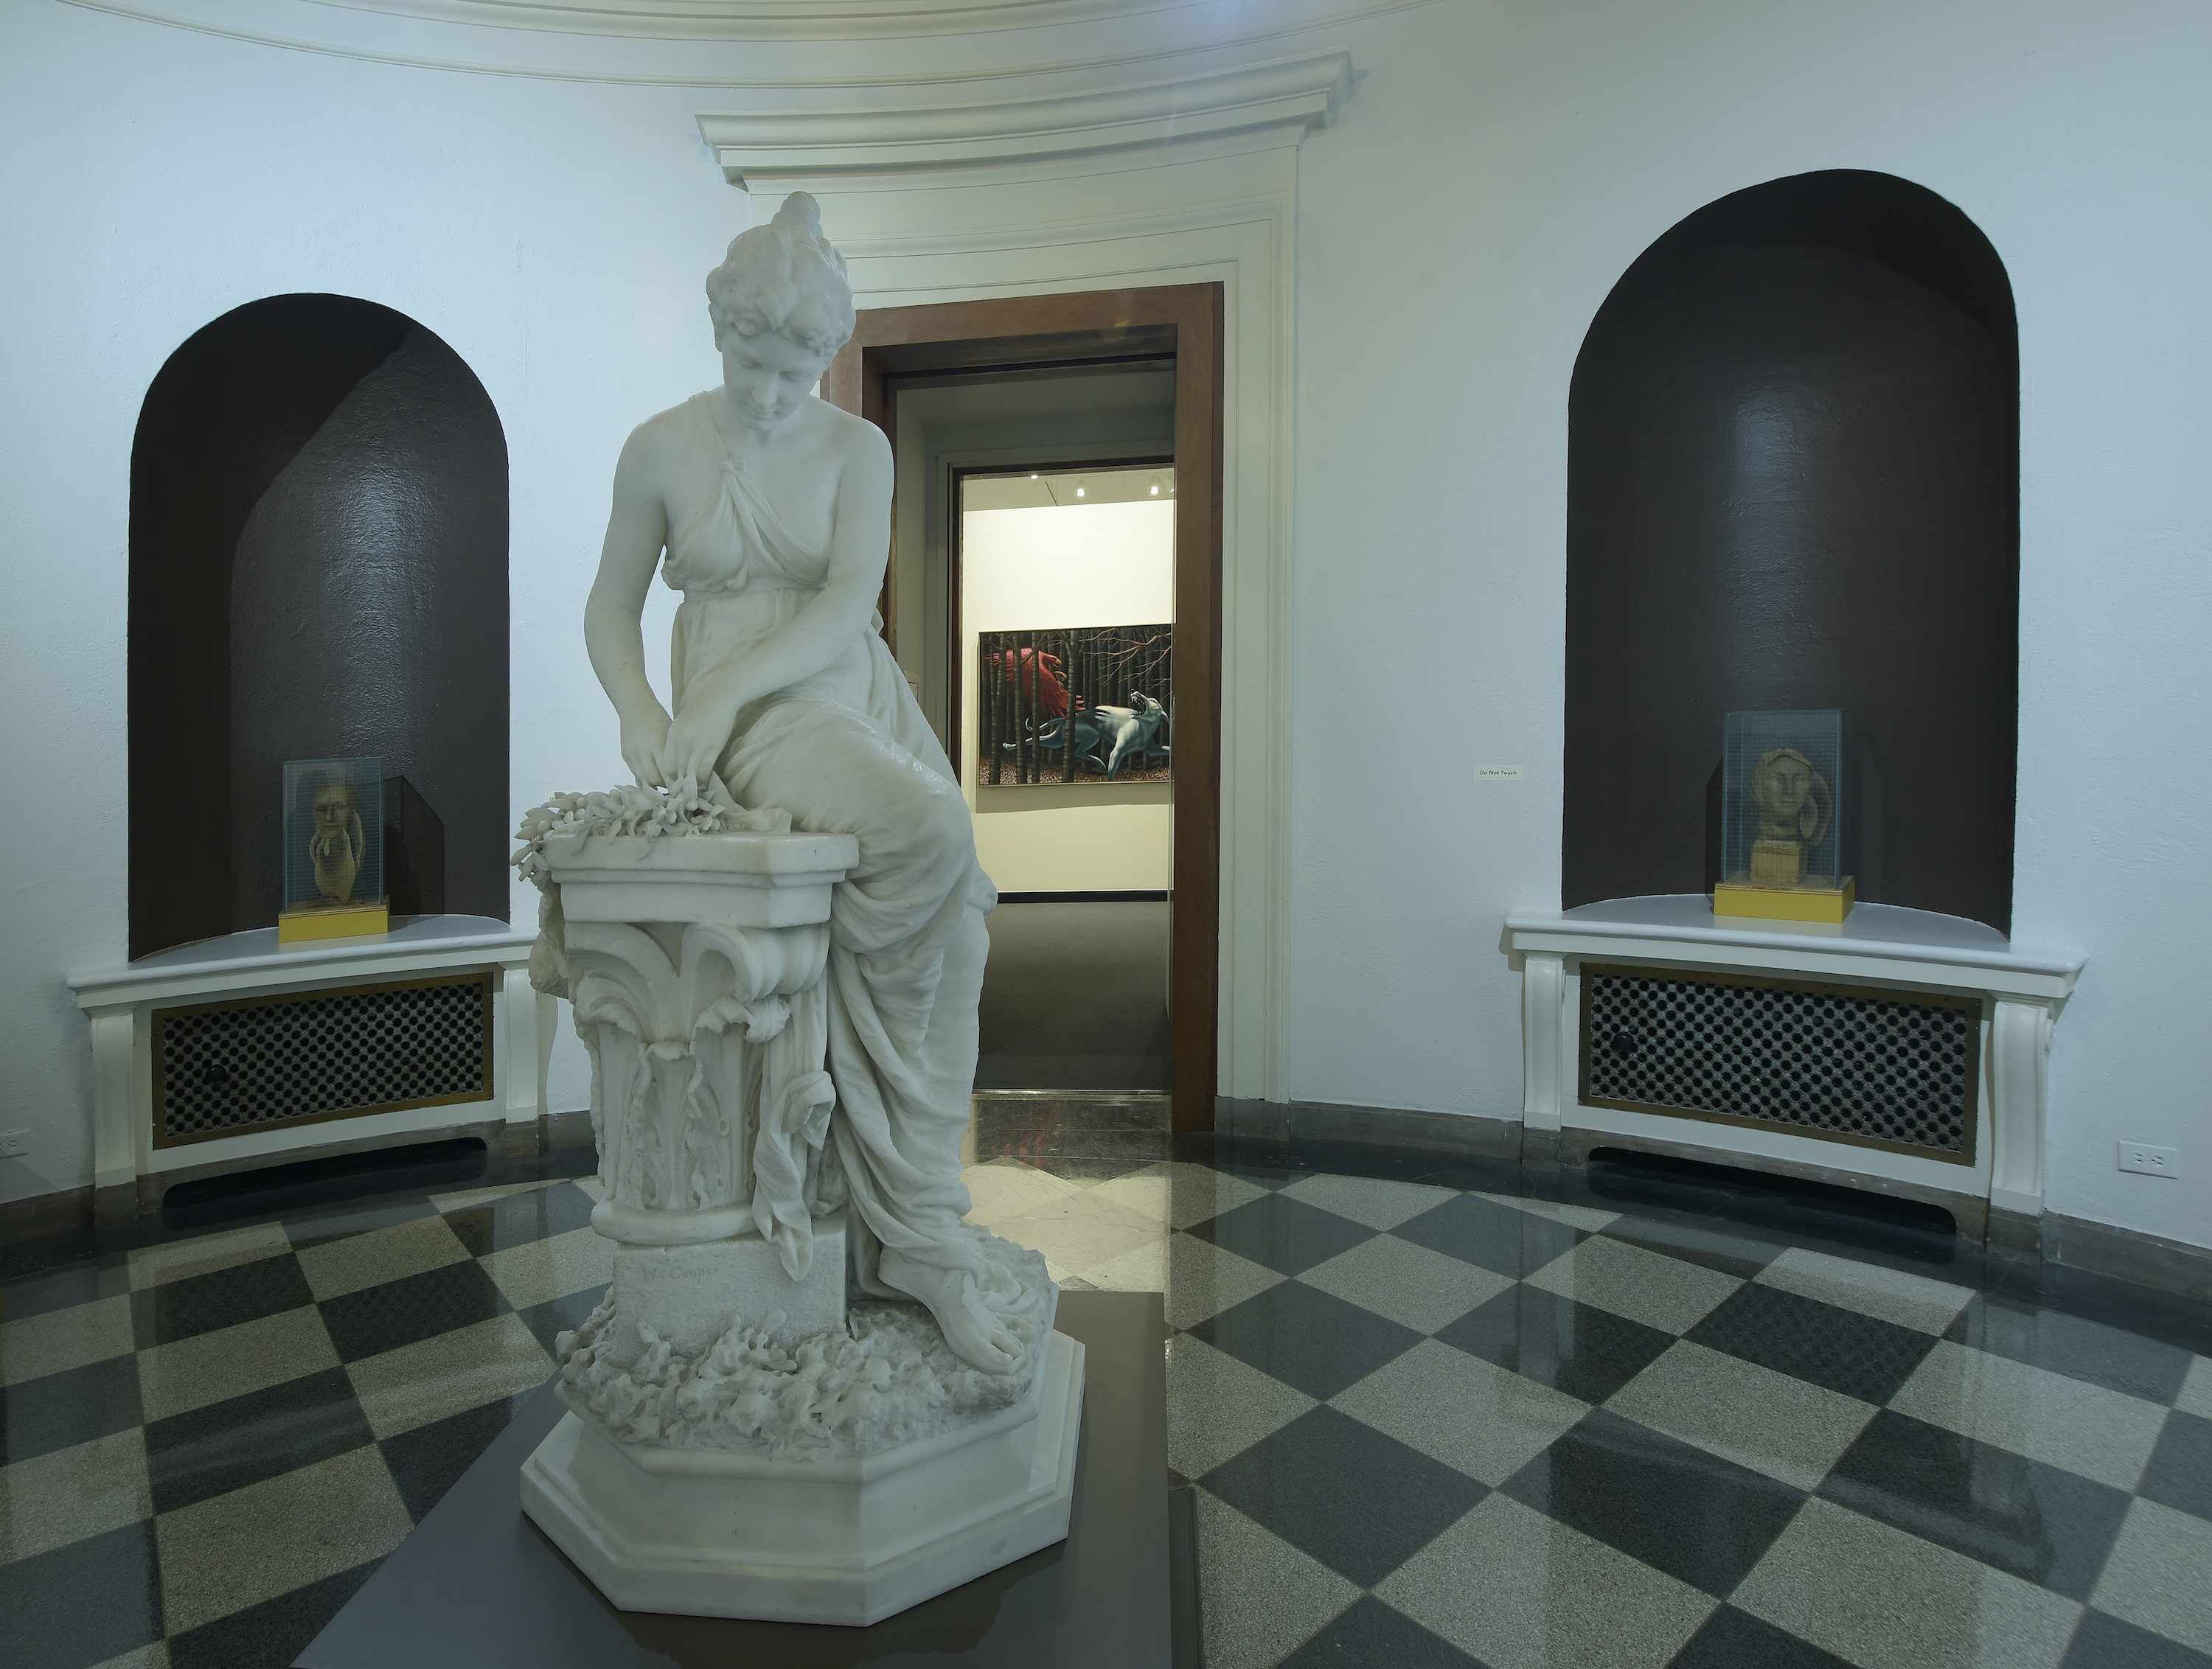 A view of the rotunda gallery, a small round room with a marble statue of a woman in the middle. Alcoves on either side of the statue have artworks in them as well.